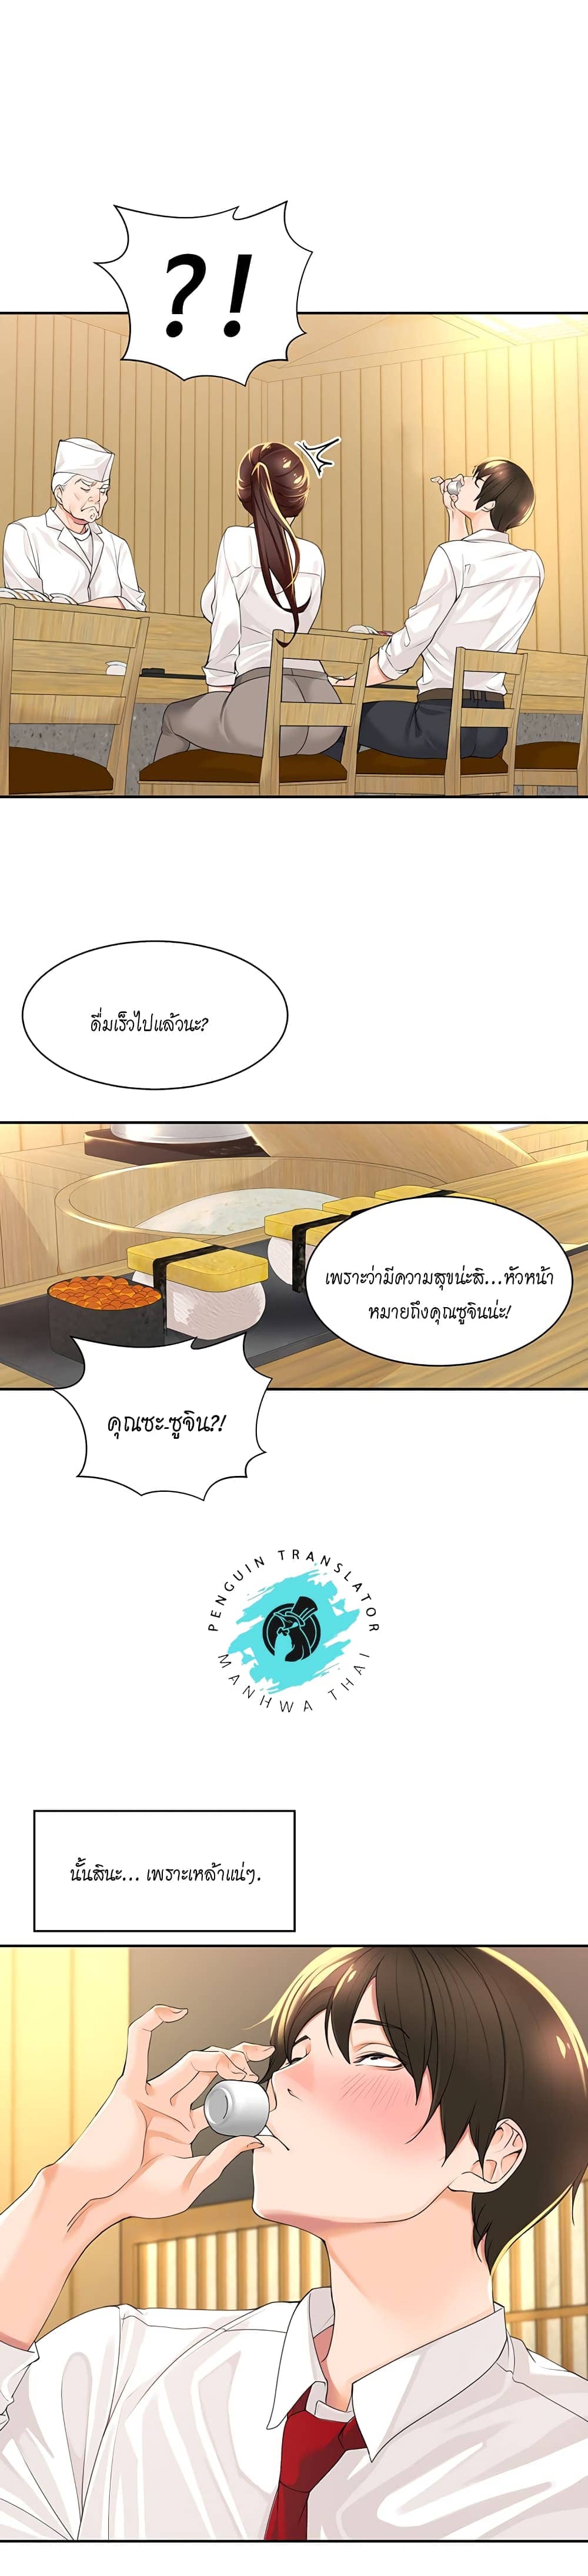 Manager, Please Scold Me ตอนที่ 2 ภาพ 15